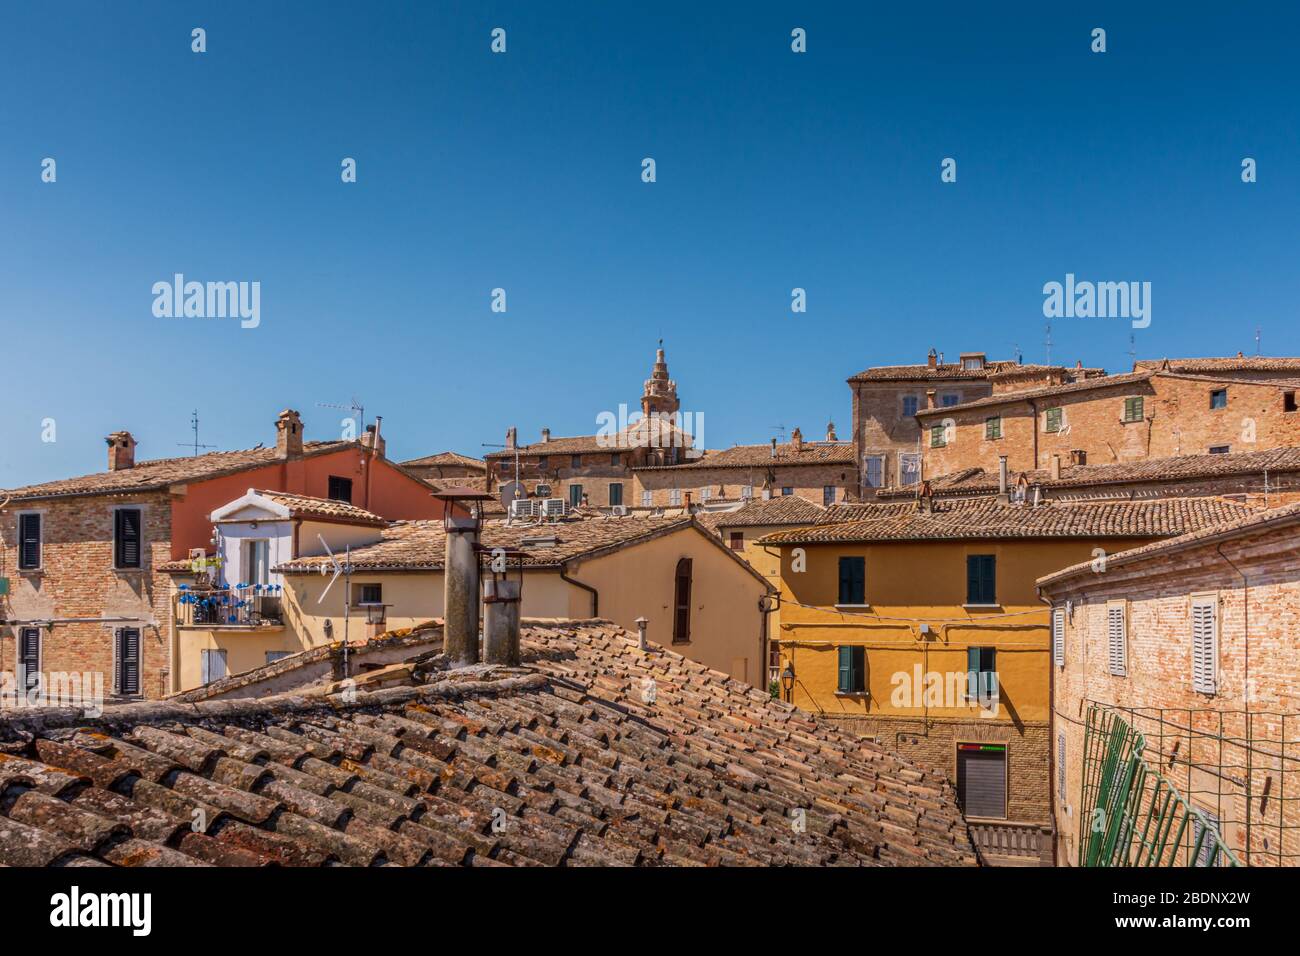 Skyline of the medieval town of Corinaldo, Le Marche, Italy, near Senigallia on a hot and sunny Summer morning Stock Photo